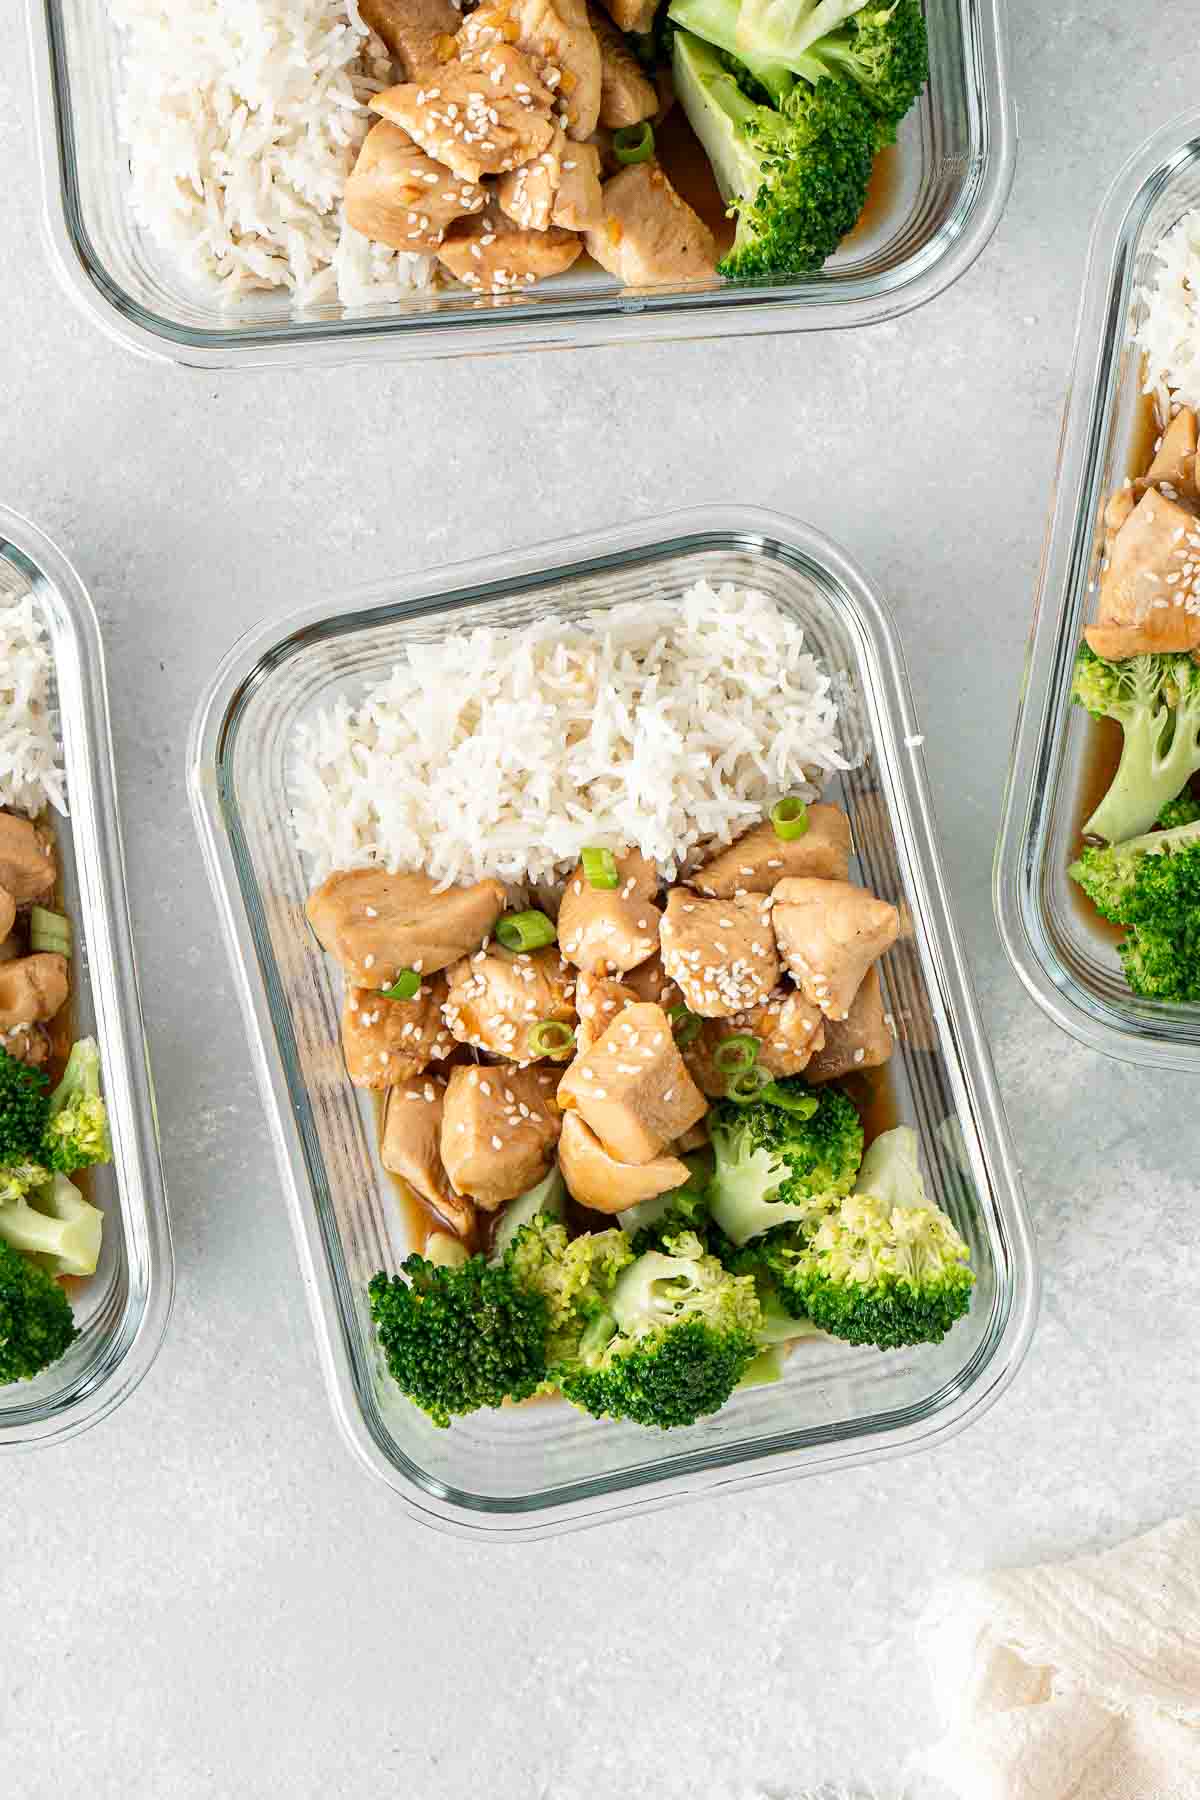 Teriyaki chicken, broccoli and rice in meal prep containers.